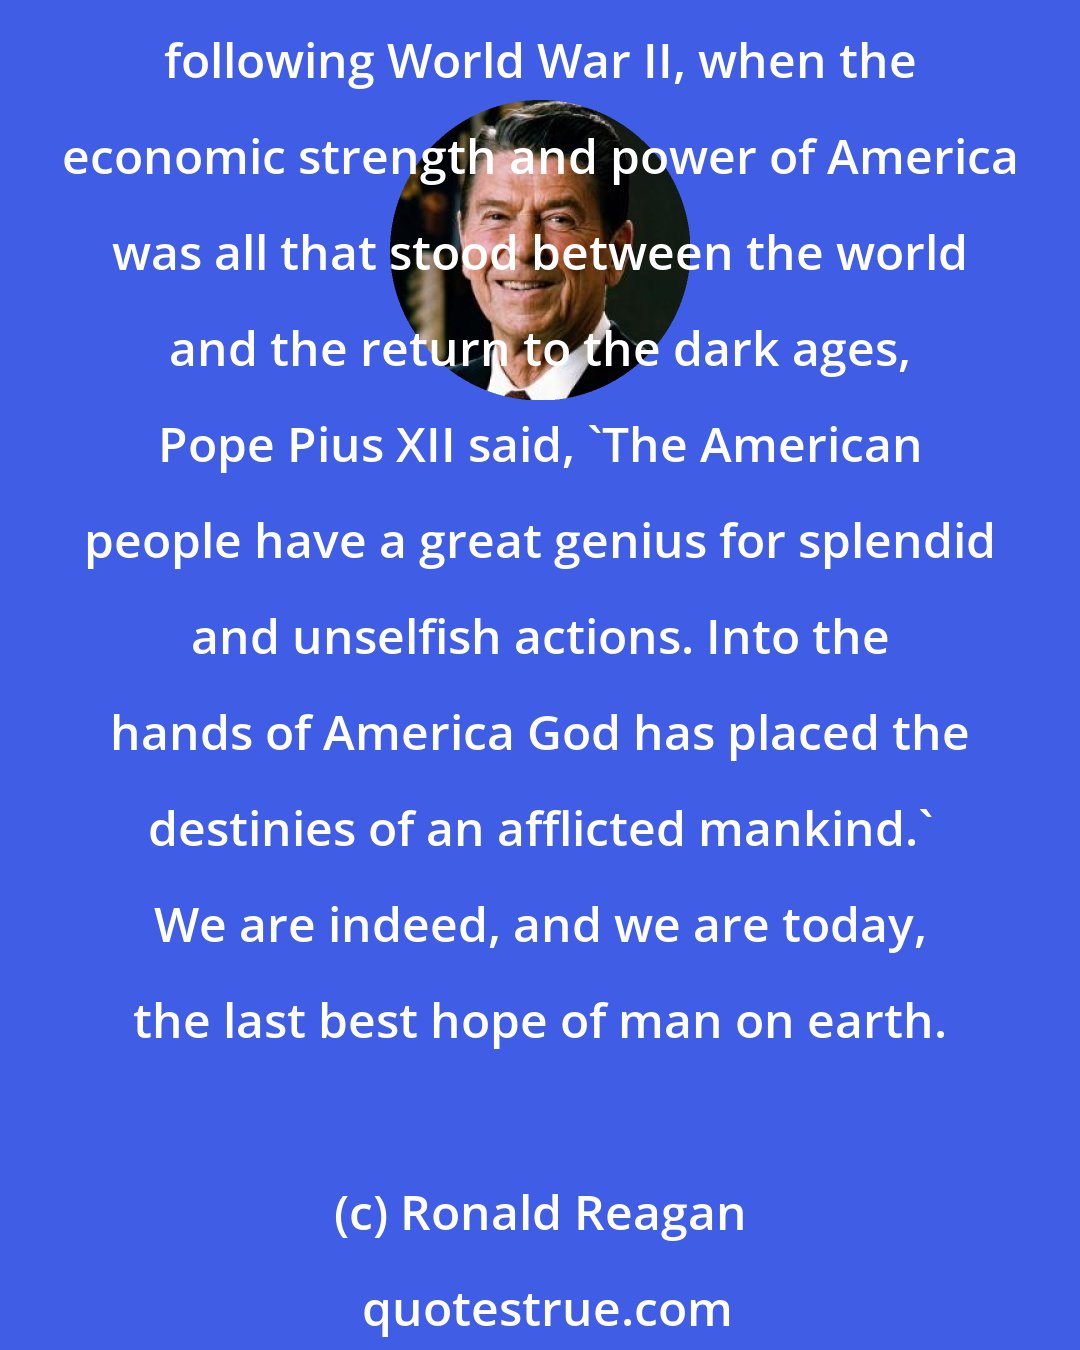 Ronald Reagan: We cannot escape our destiny, nor should we try to do so. The leadership of the free world was thrust upon us two centuries ago in that little hall of Philadelphia. In the days following World War II, when the economic strength and power of America was all that stood between the world and the return to the dark ages, Pope Pius XII said, 'The American people have a great genius for splendid and unselfish actions. Into the hands of America God has placed the destinies of an afflicted mankind.' We are indeed, and we are today, the last best hope of man on earth.